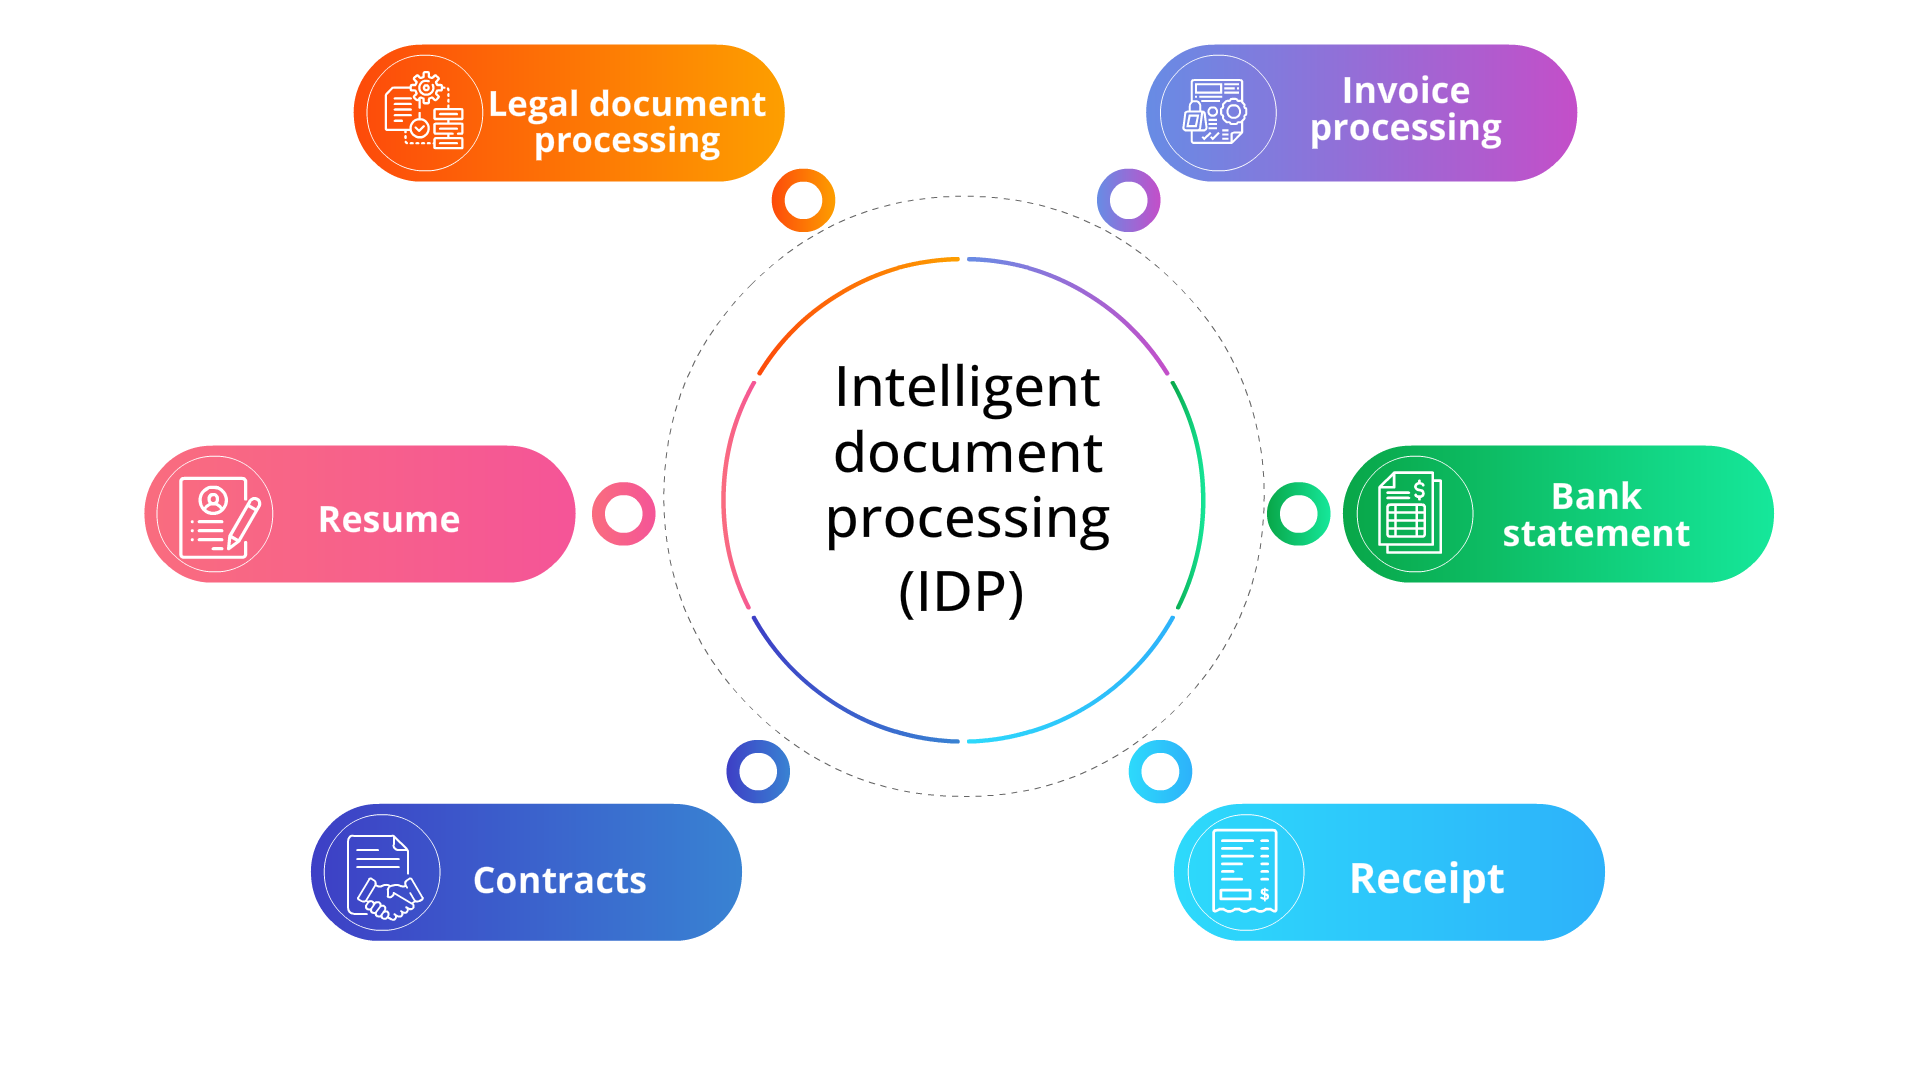 Intelligent document processing (IDP) use cases